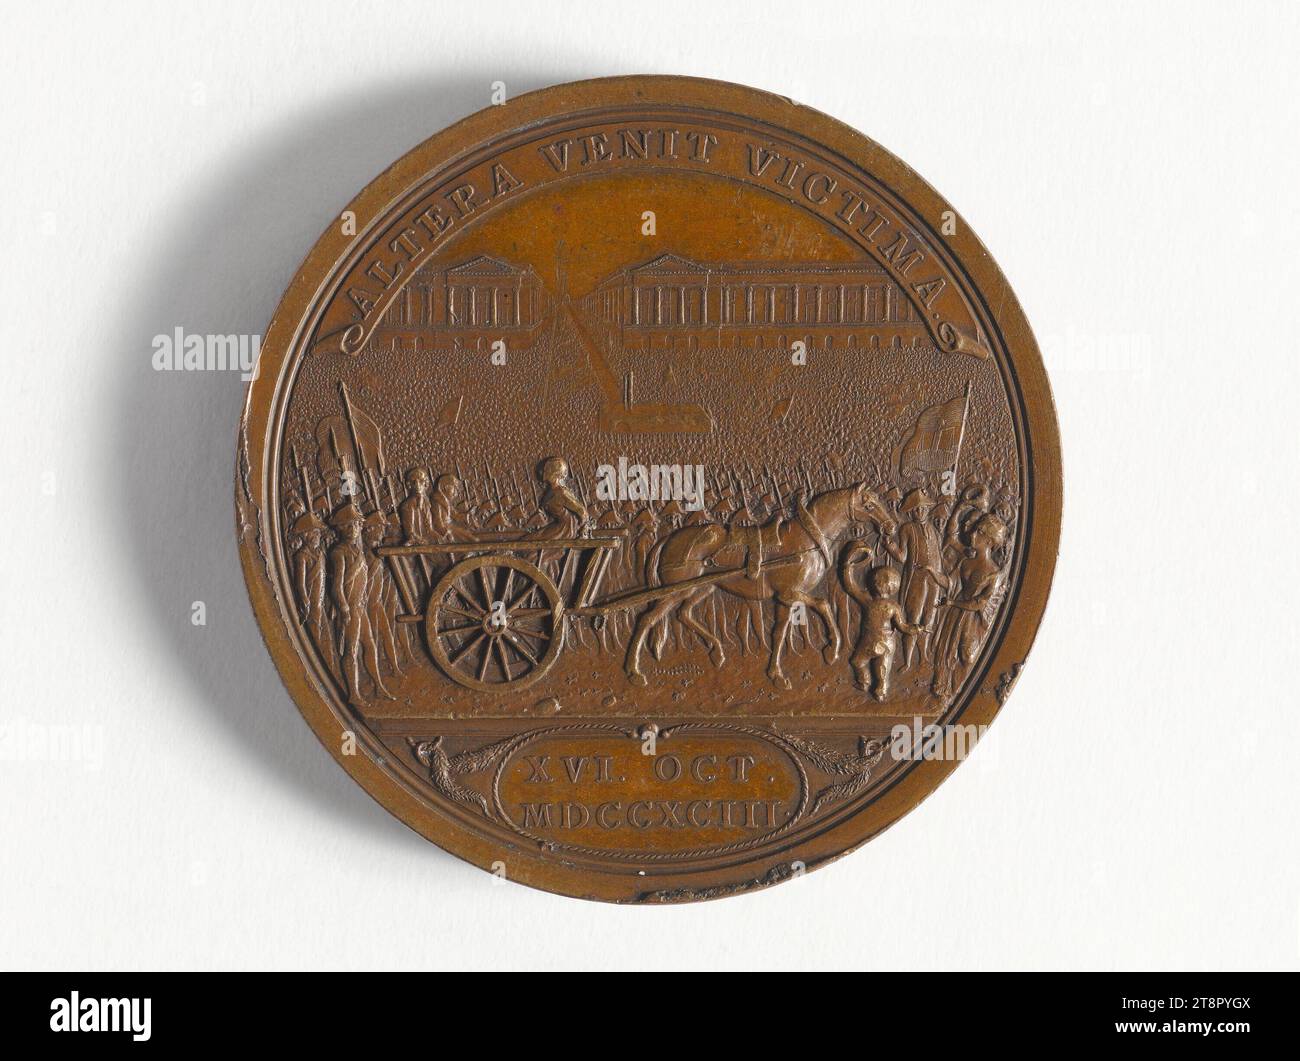 Execution of Marie-Antoinette, October 16, 1793, Küchler, Conrad Heinrich, Medal Engraver, Array, Numismatic, Medal, Dimensions - Work: Diameter: 4.8 cm, Weight (type size): 60.06 g Stock Photo